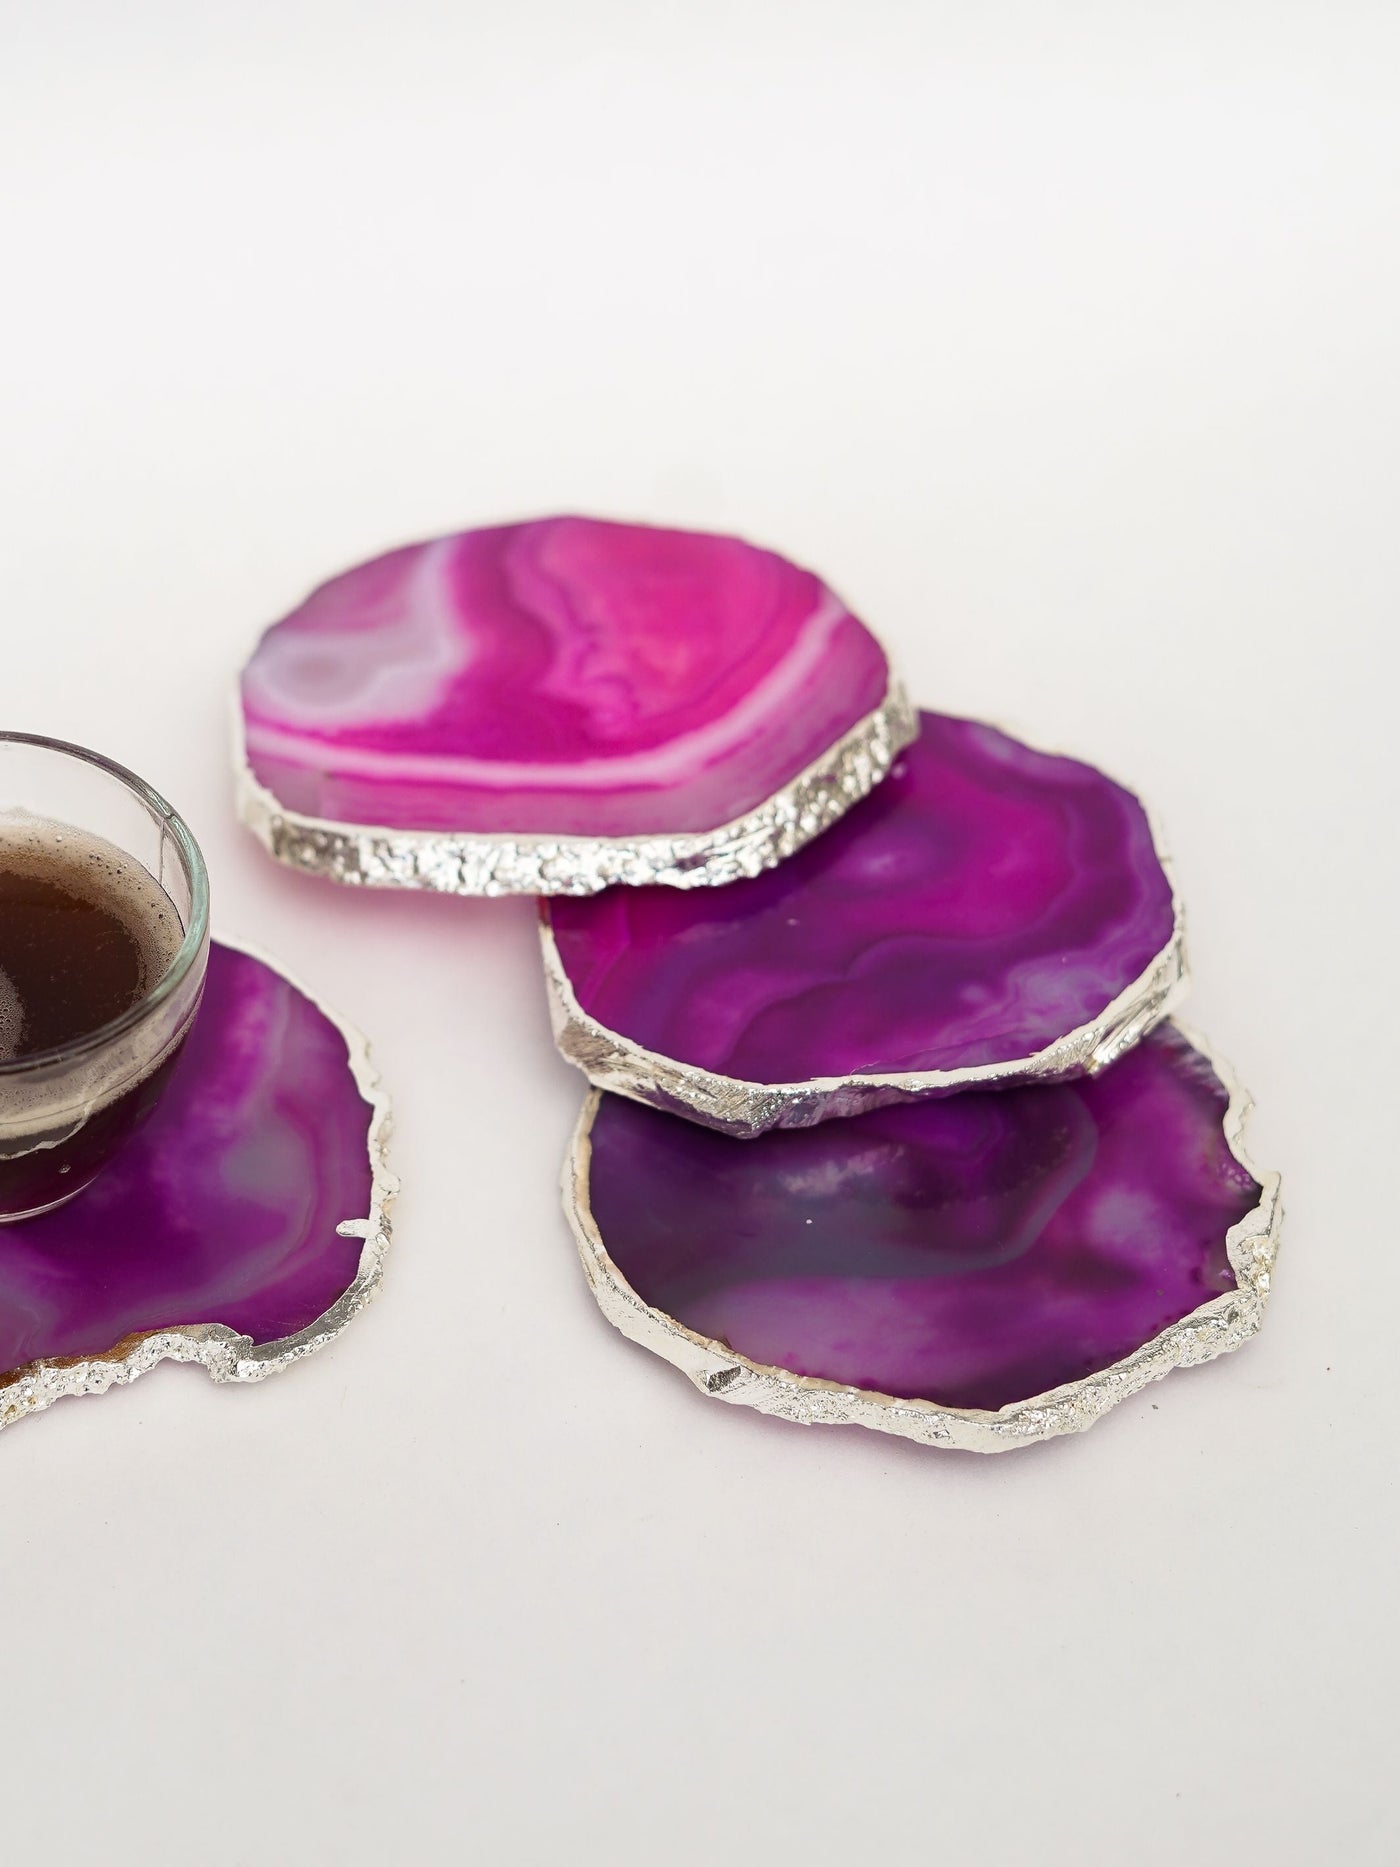 Coaster Set of 4 - Brazilian Agate Pink with Silver Plated edge